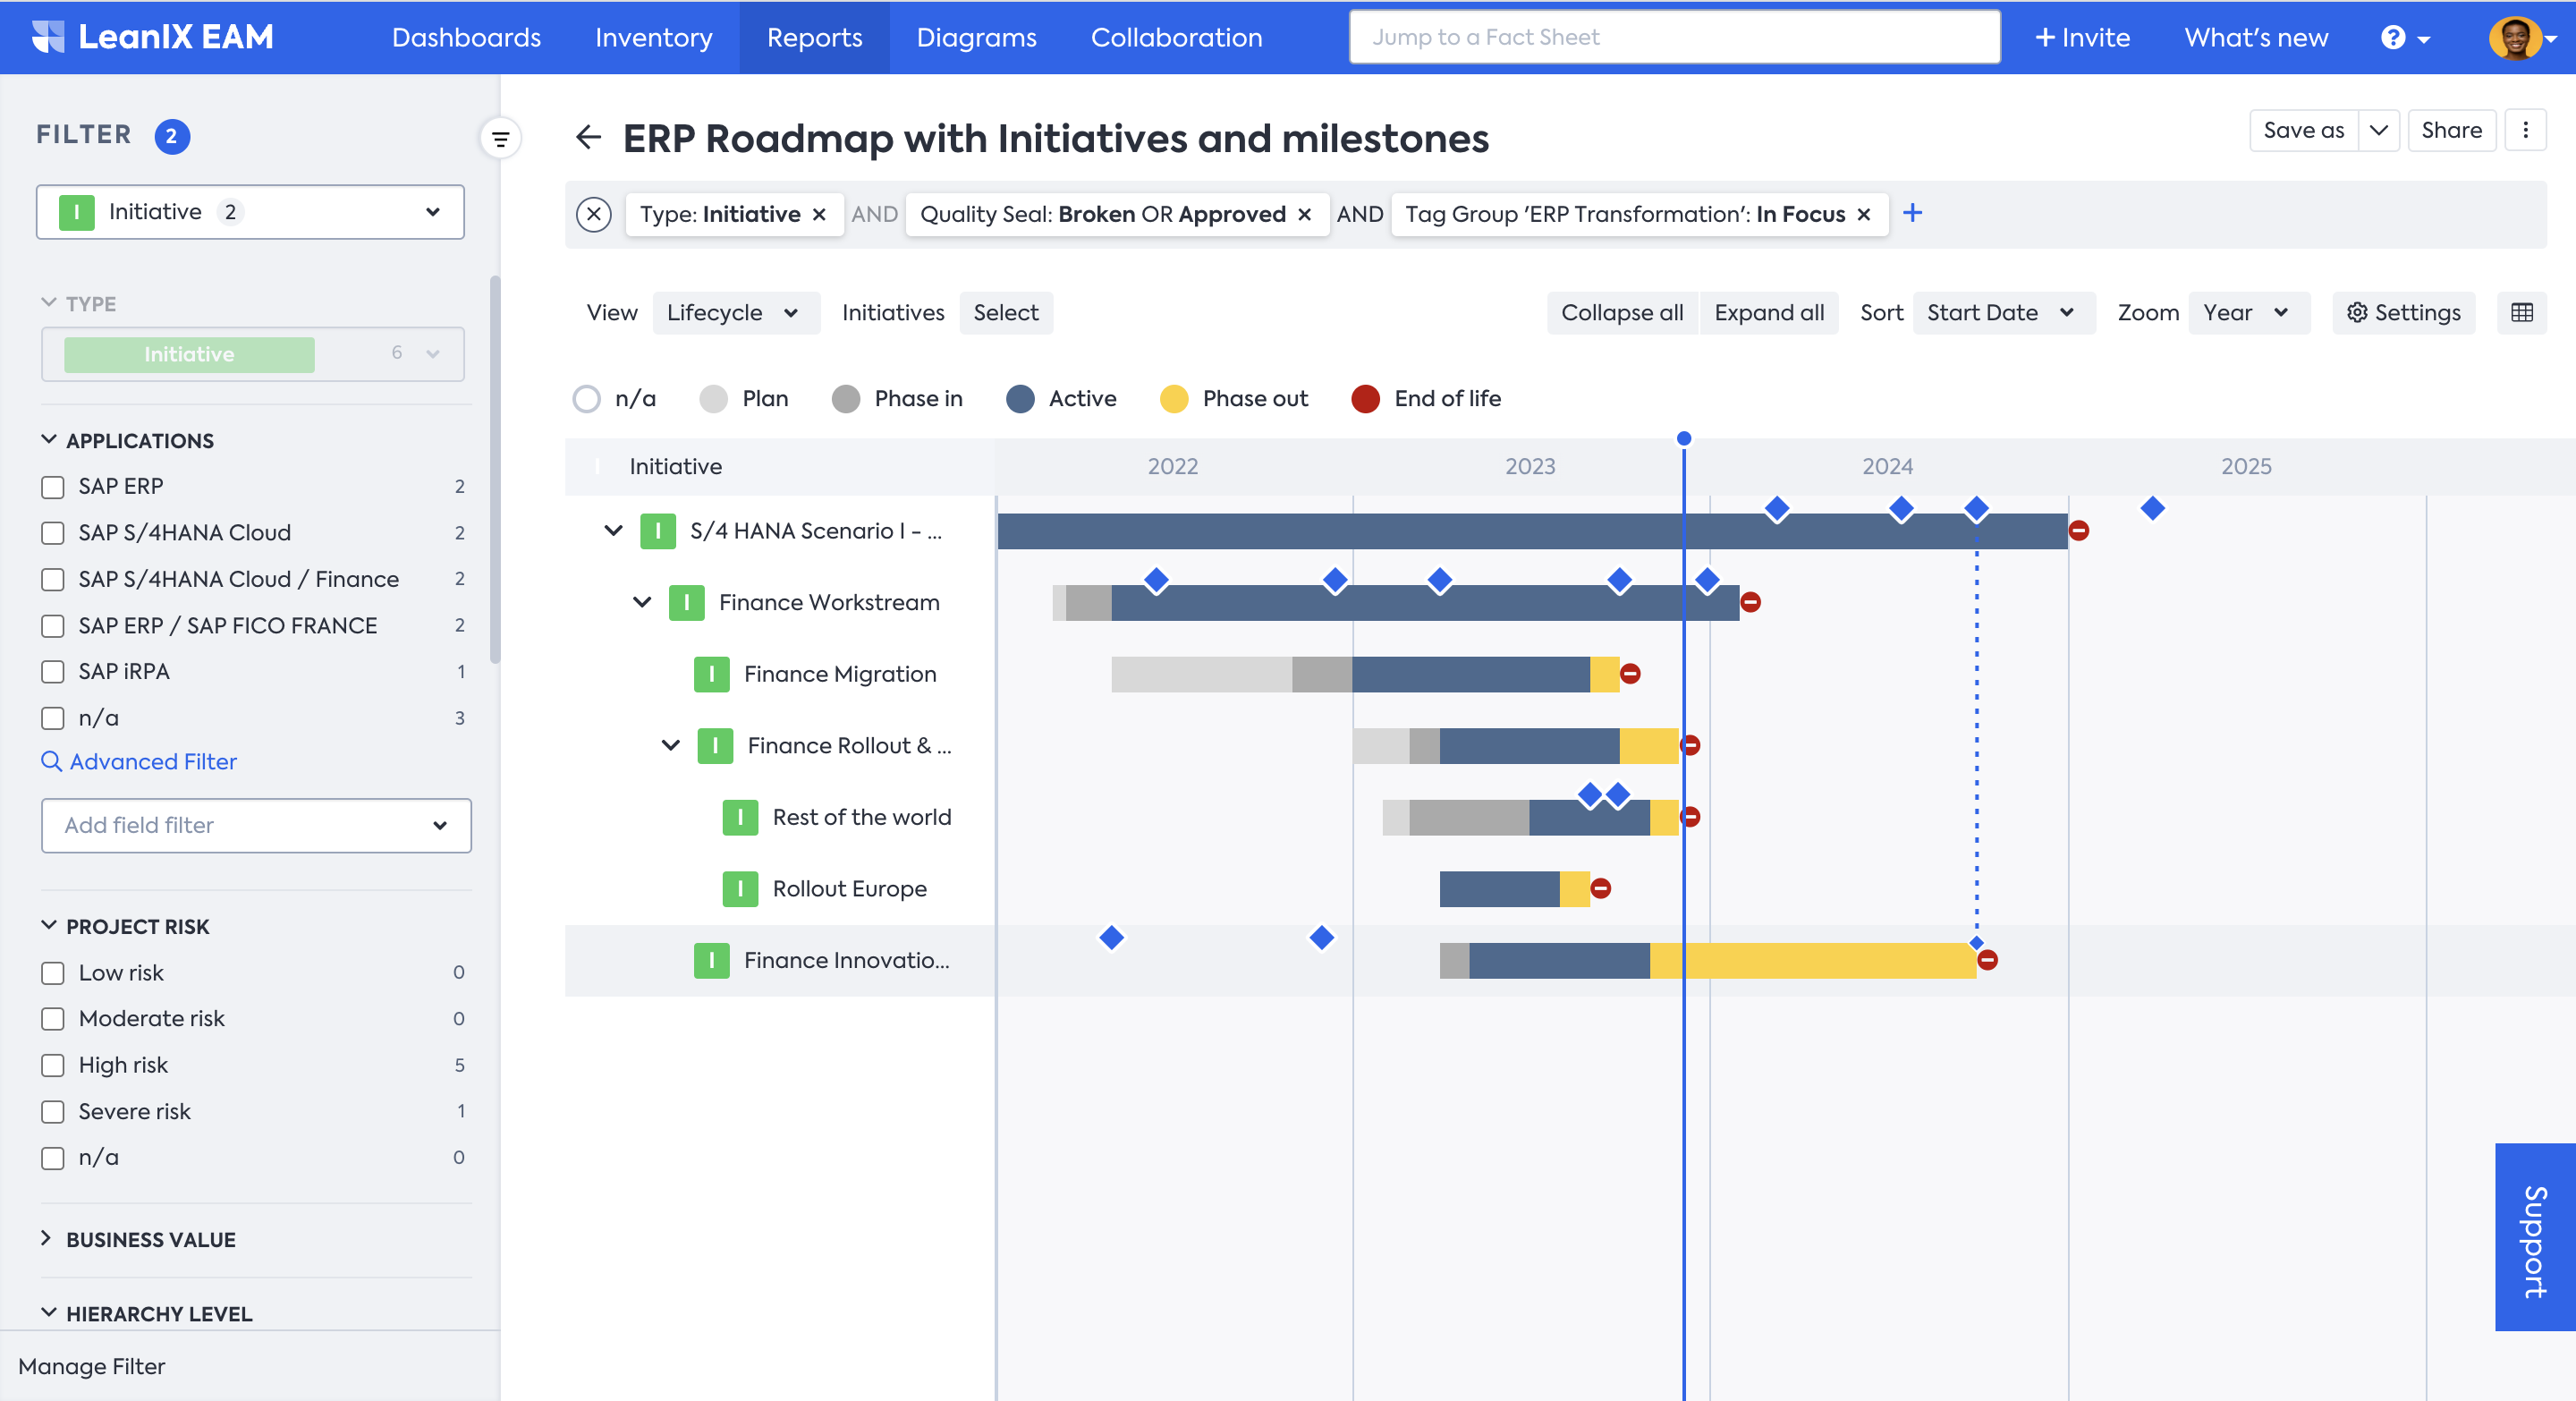 ERP Roadmap with Initiatives and Milestones